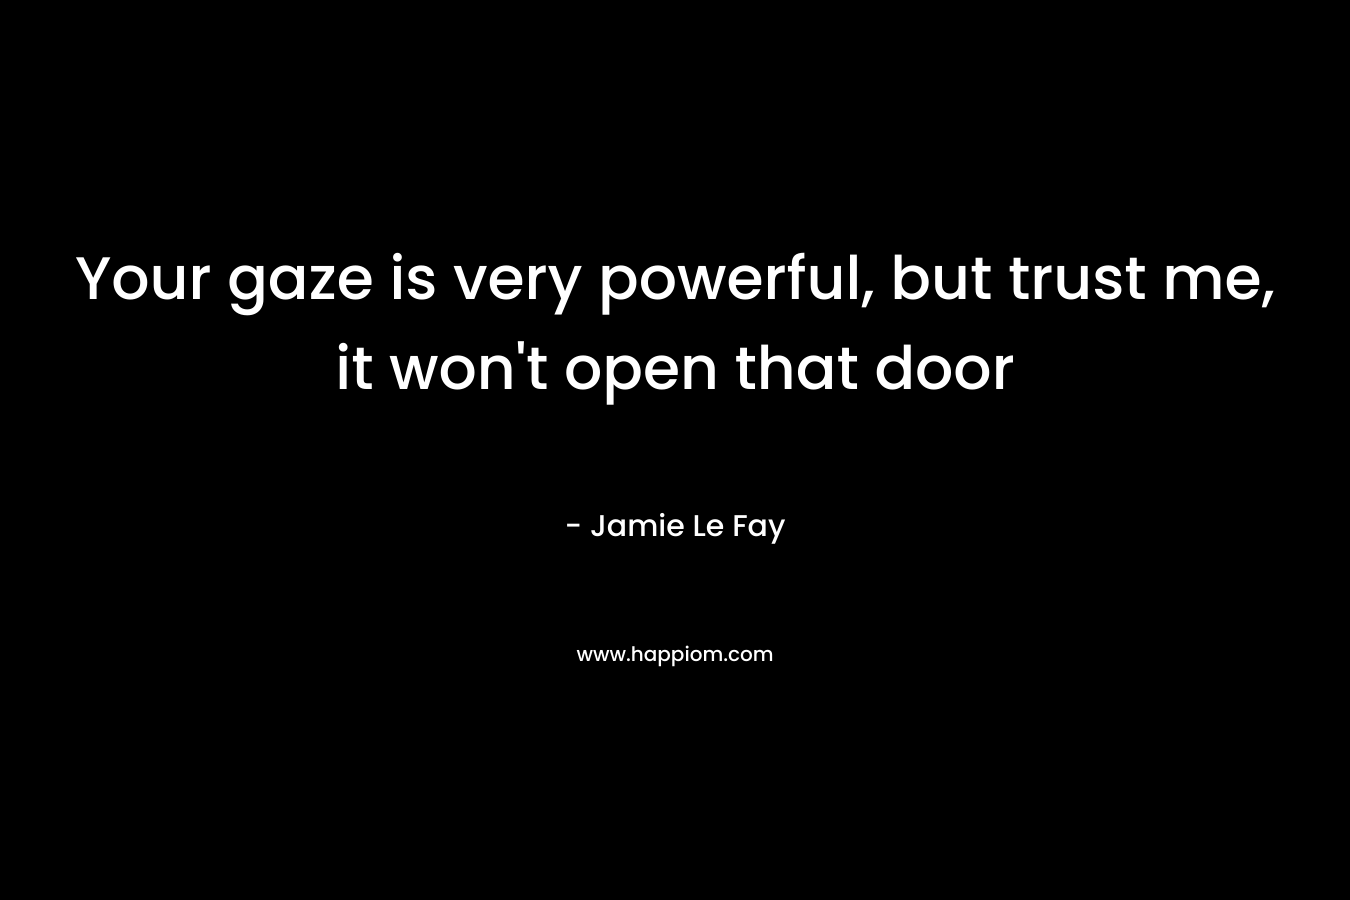 Your gaze is very powerful, but trust me, it won’t open that door – Jamie Le Fay